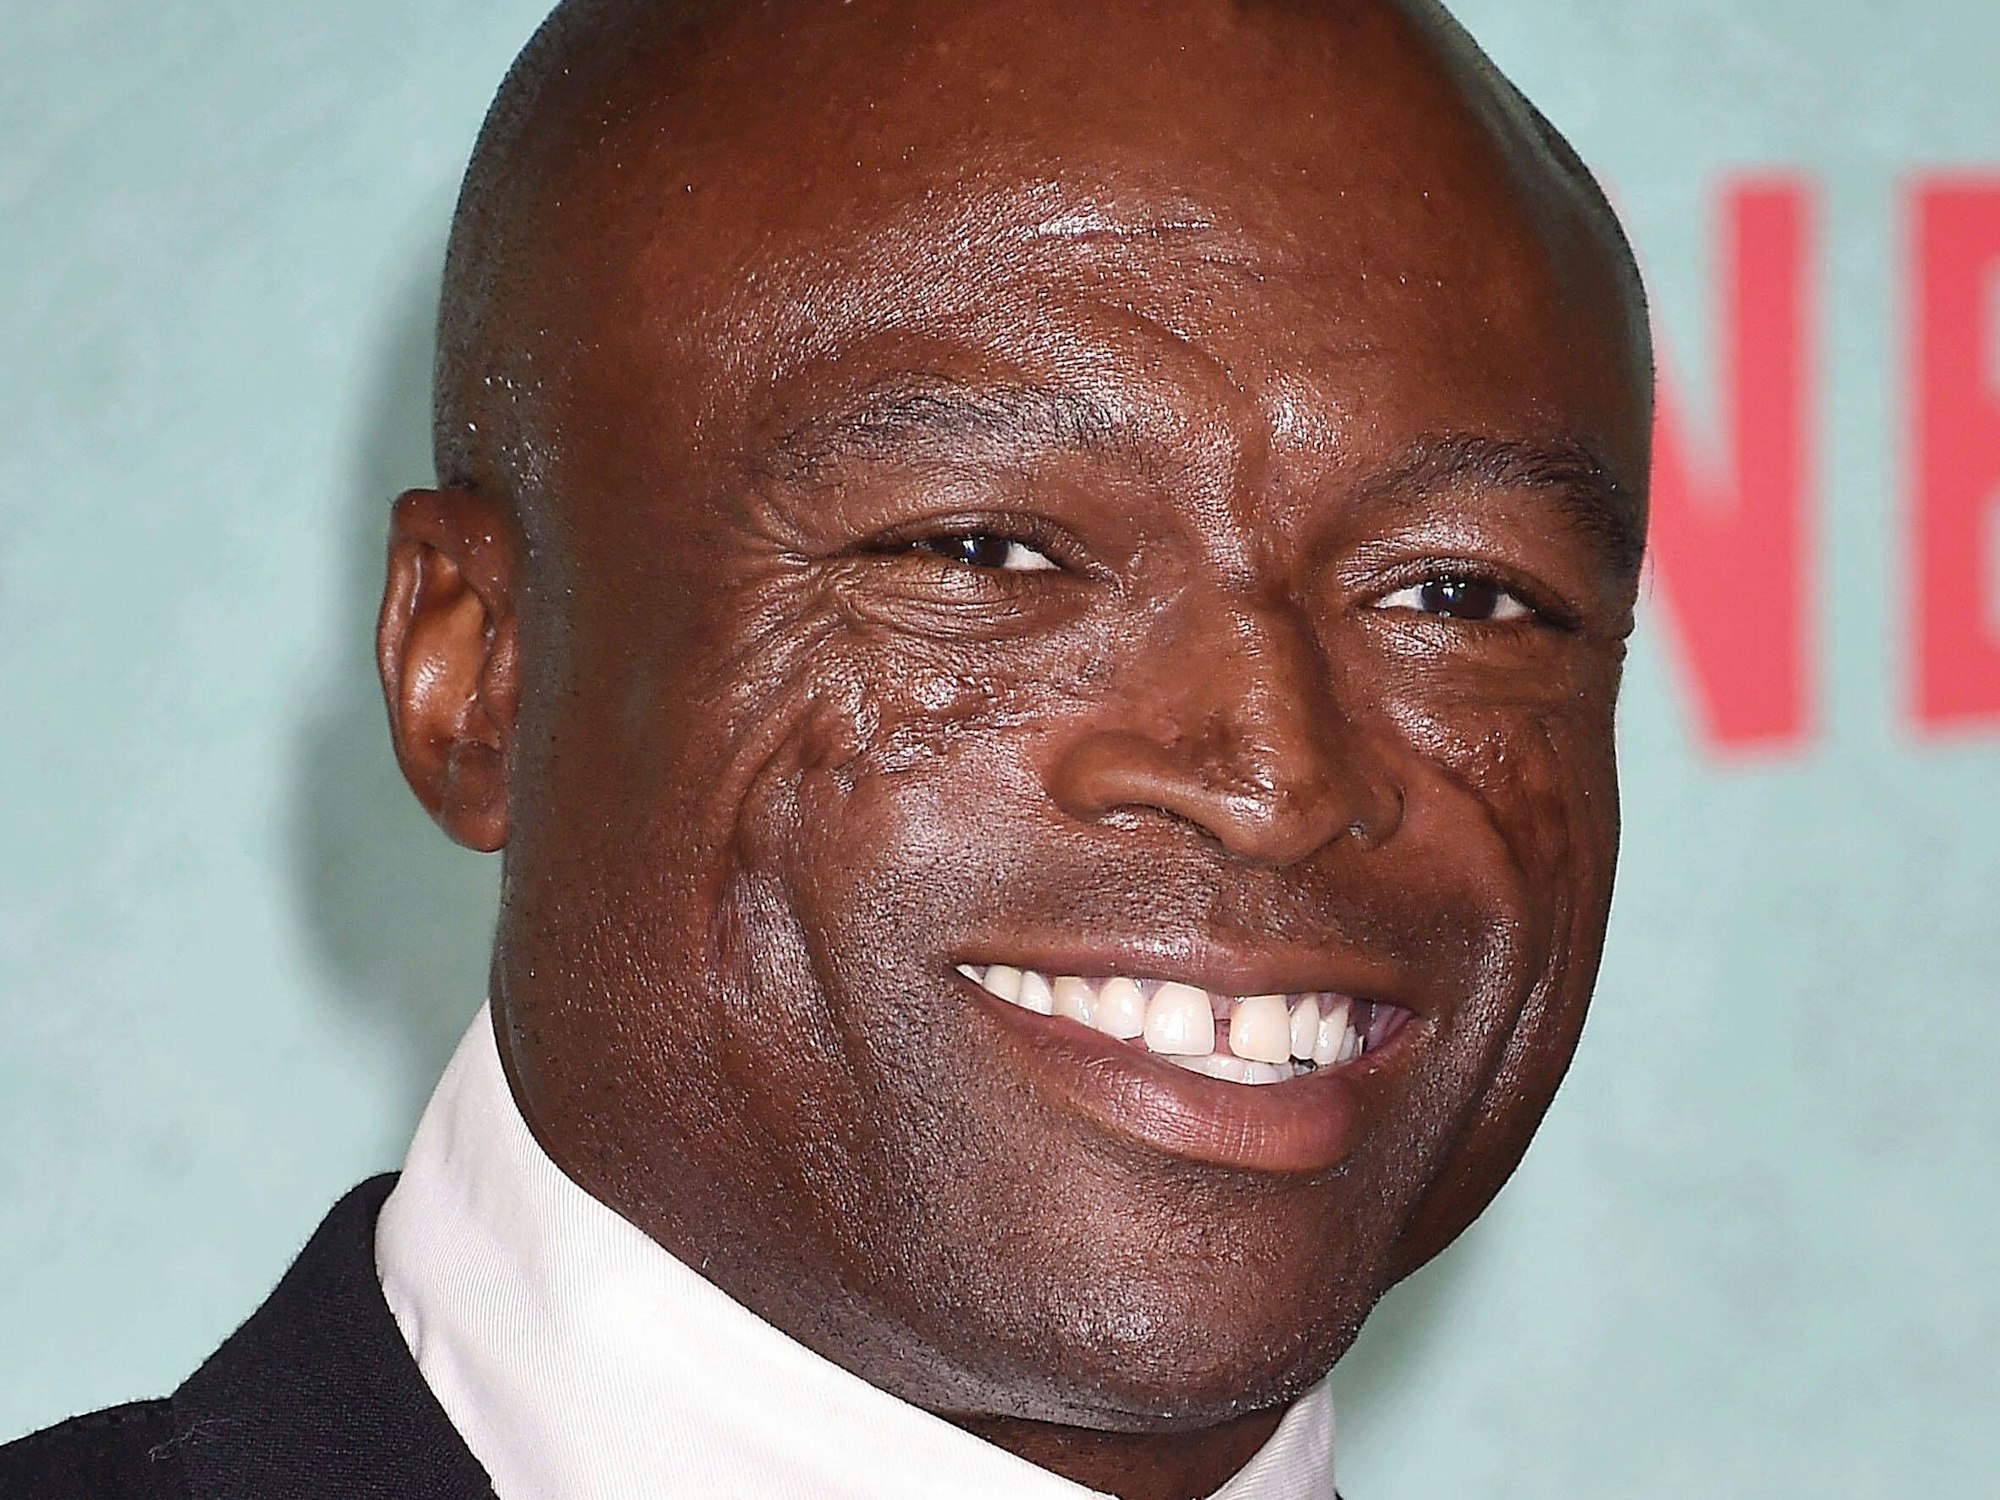 Seal bei der „The Harder They Fall“-Filmpremiere am 13.10.2021 in Los Angeles.